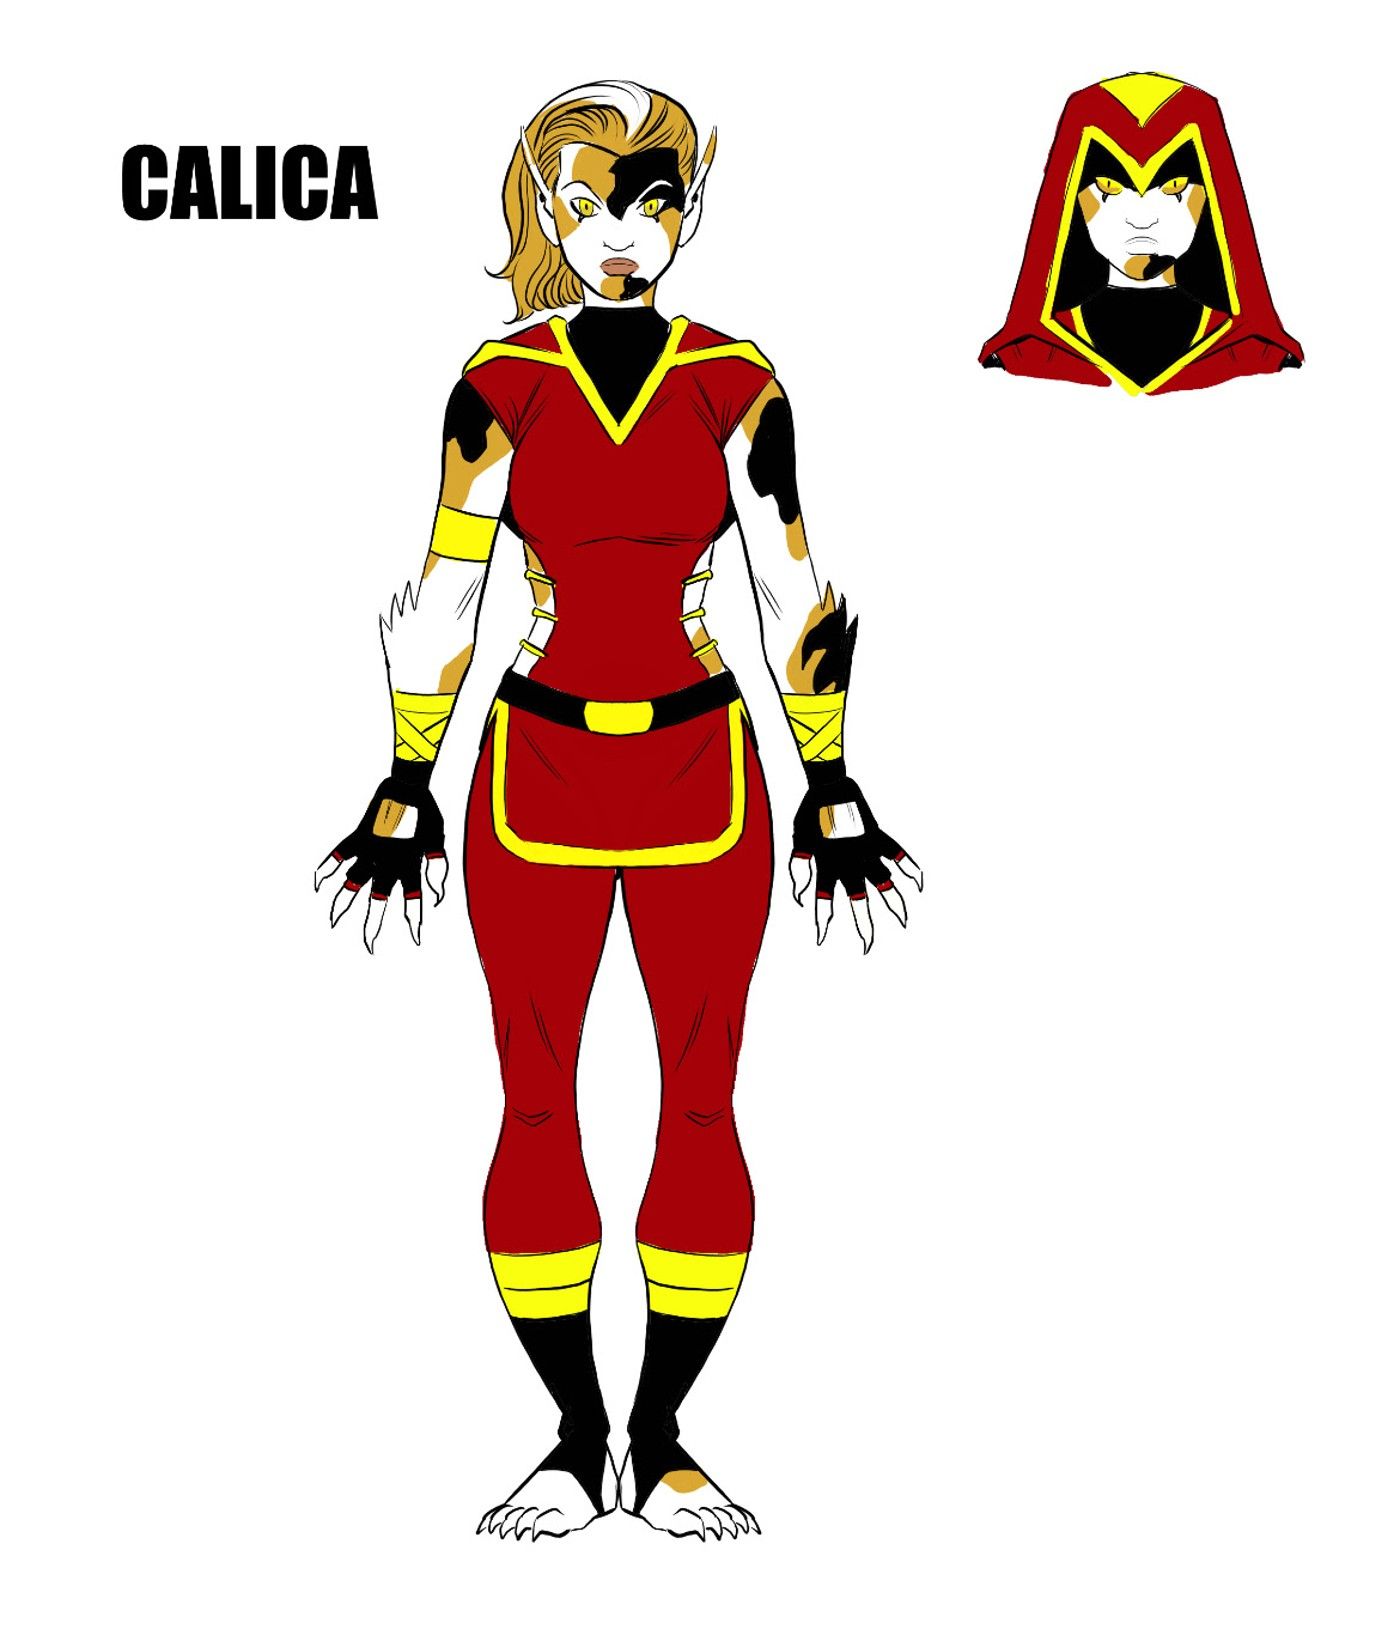 ThunderCats’ New Hero CALICA Revealed, As Blockbuster New Series Expands Franchise Lore